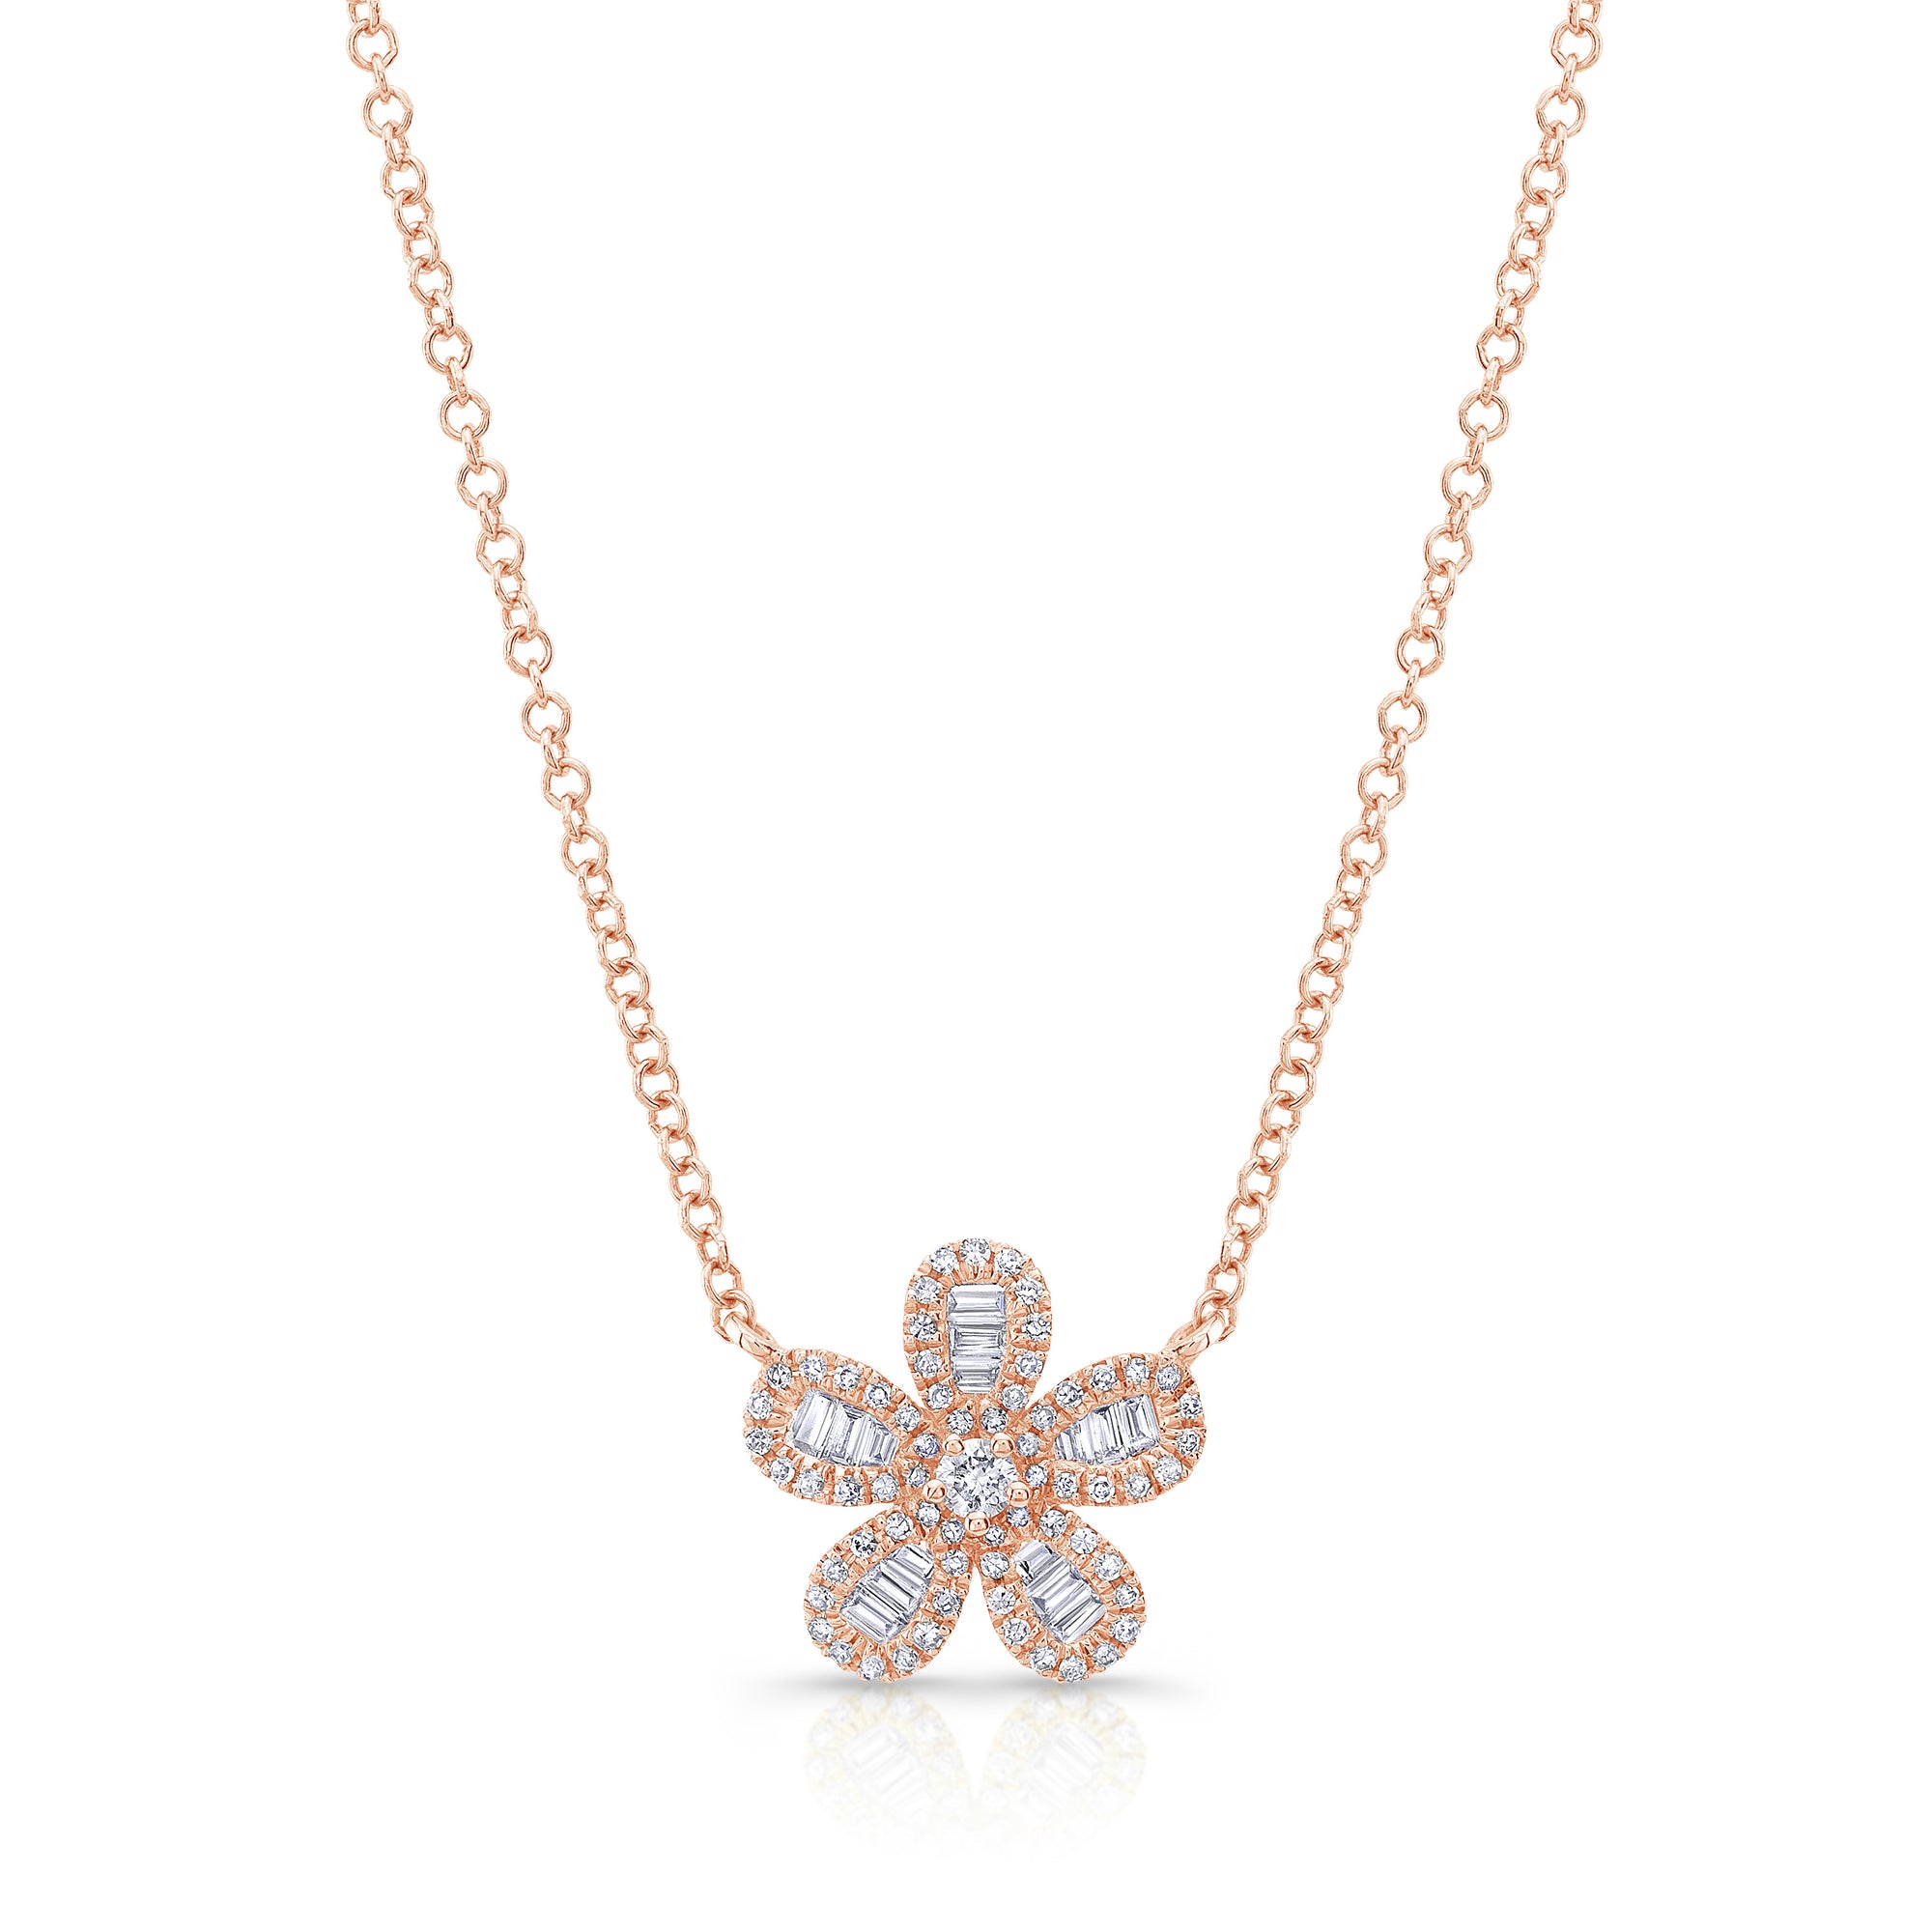 Diamond Baguette Flower Pendant Necklace -14k yellow gold weighing 1.90 grams -66 round diamonds weighing .18 carats -24 straight baguettes weighing .14 carats